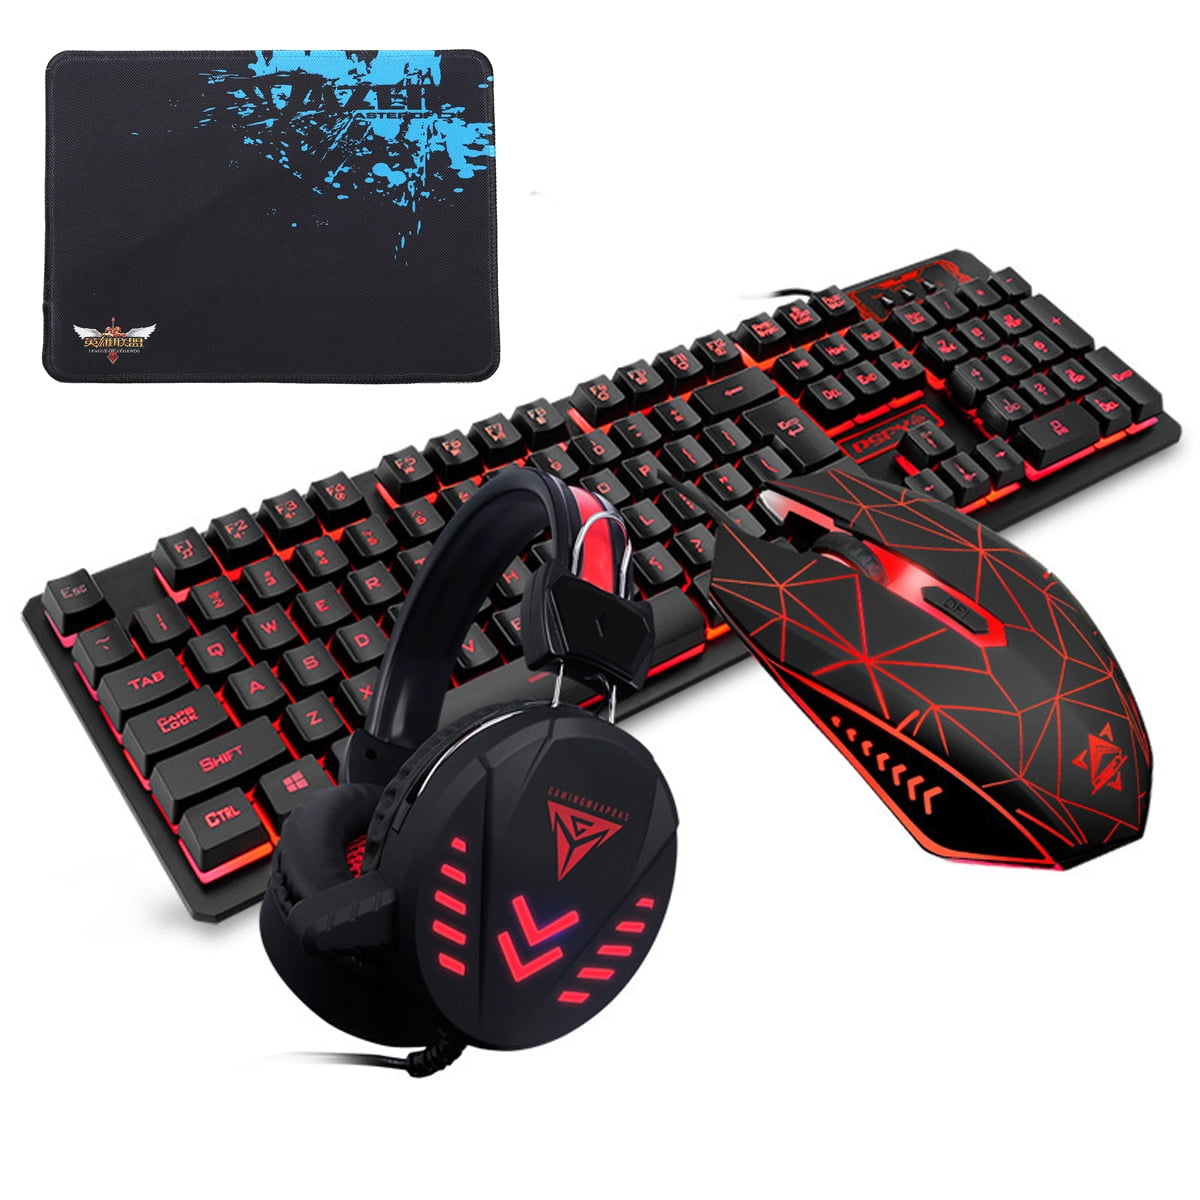 Mouse Pad Keyboard Headphones Macro Mouse Wyyggnb Gaming Keyboard Computer Backlit E-Sports Game Wired Computer Keyboard 